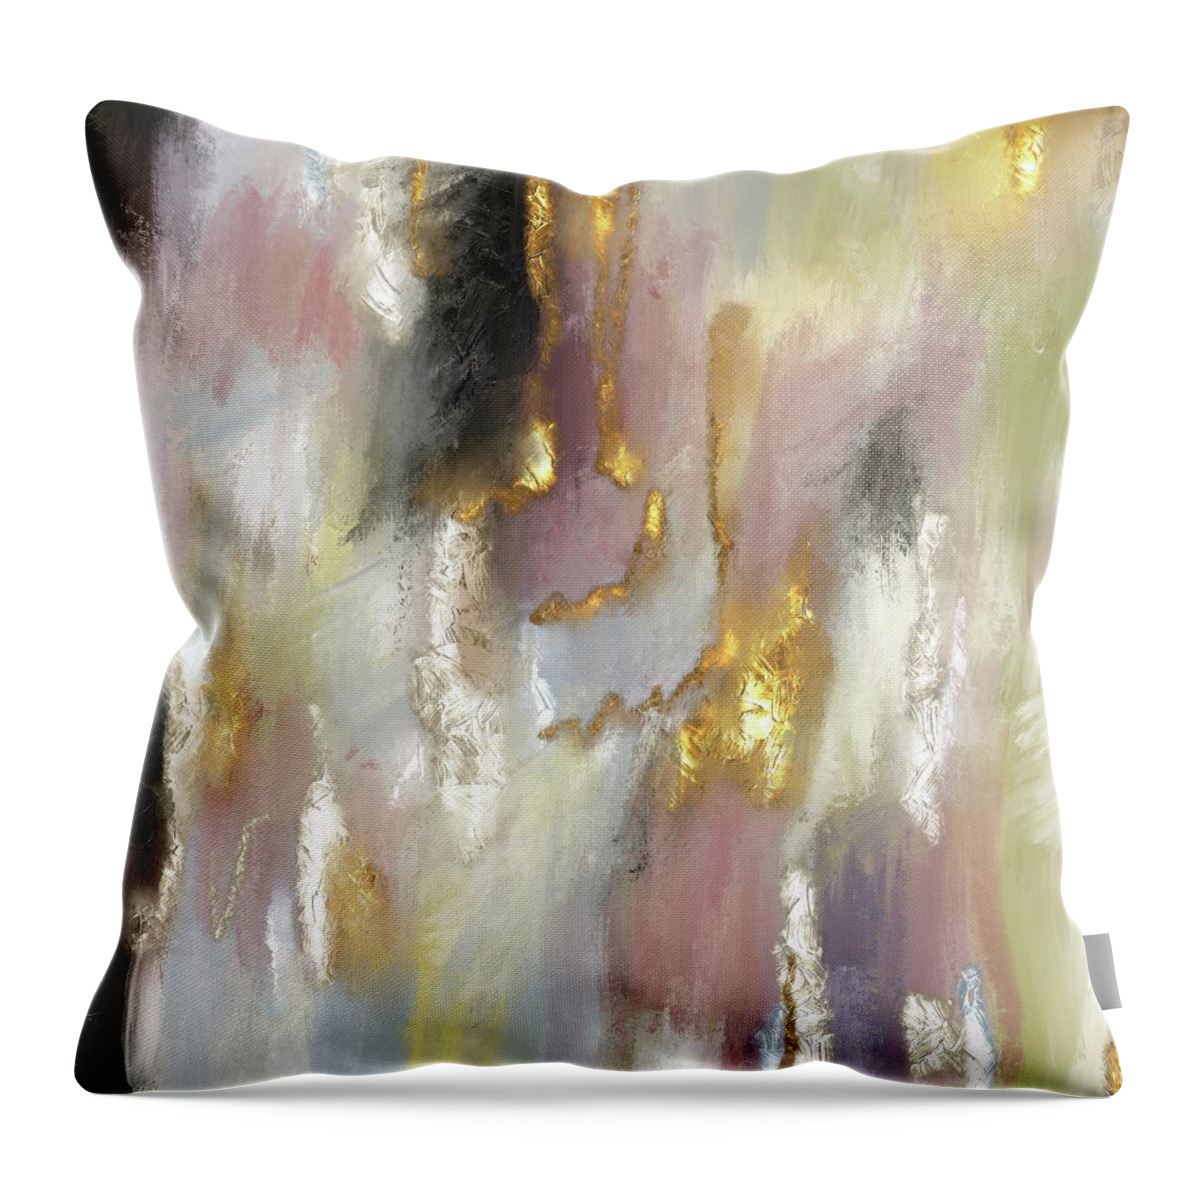 Painterly Throw Pillow featuring the painting Painterly Abstract 1 by Itsonlythemoon -